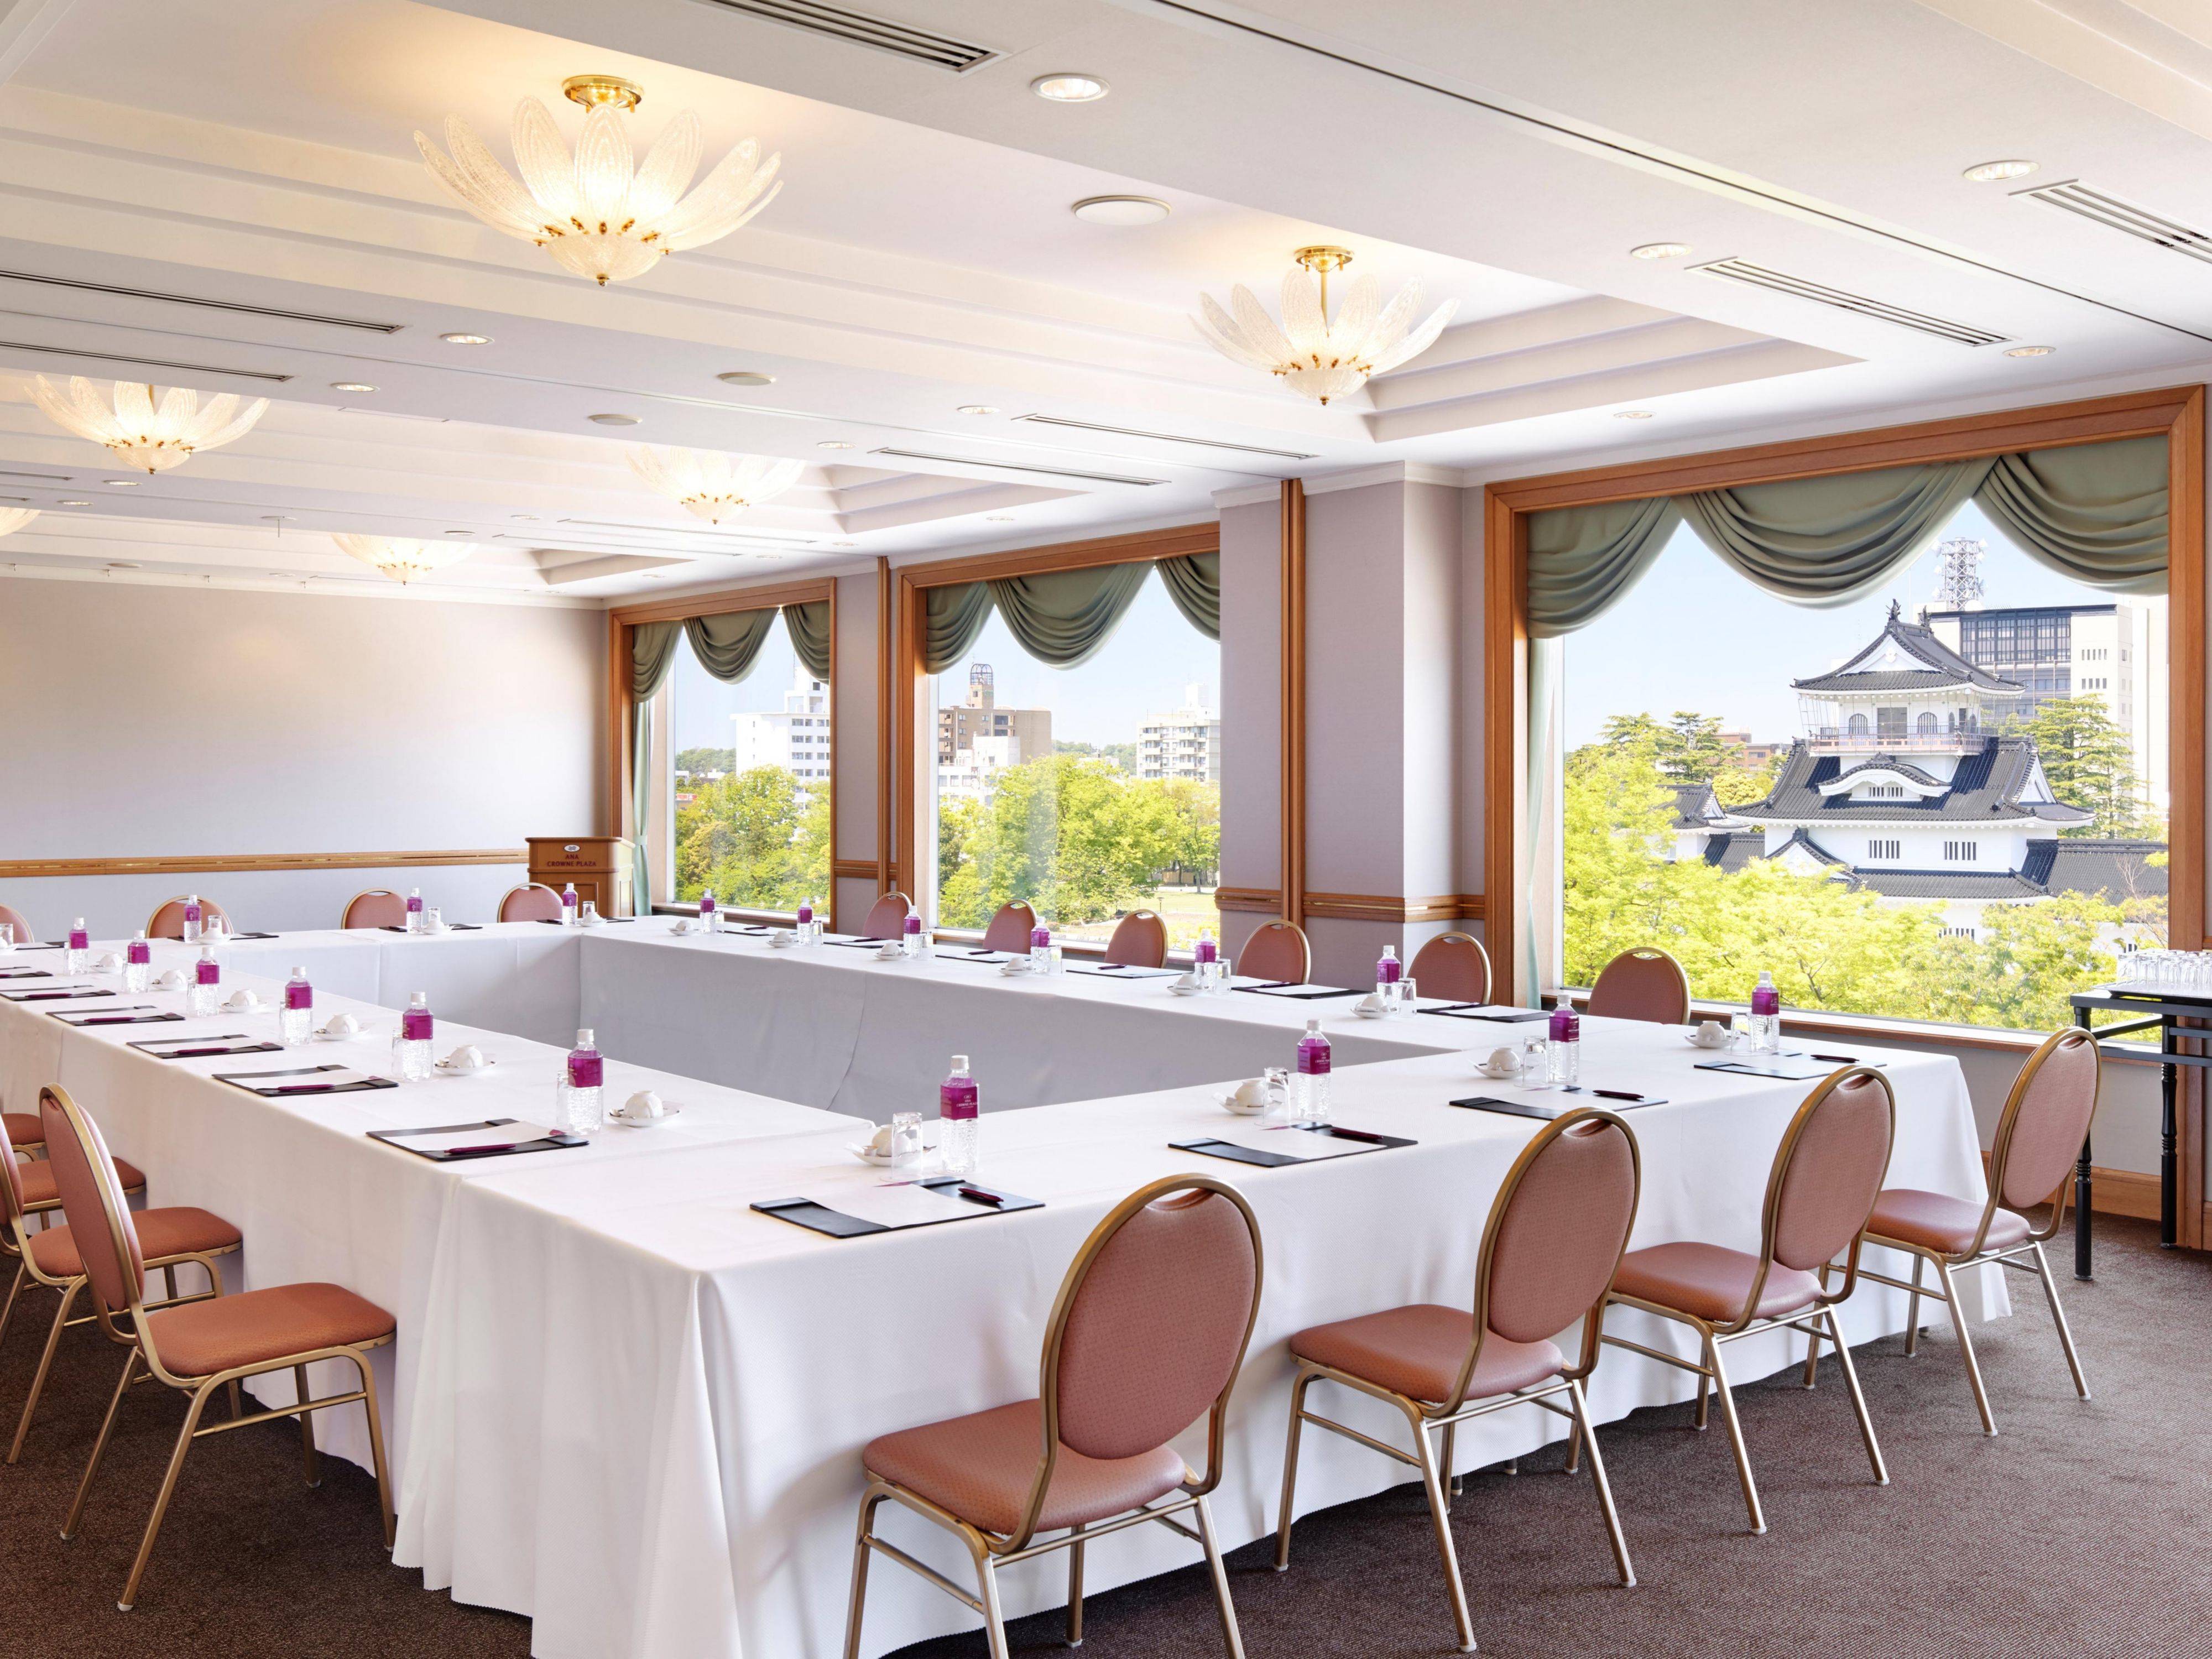 We have nine spaces, in a range of sizes that are suitable for exhibitions, conferences, small meetings and social gatherings. A unique sky banquet hall is located on the 19th floor with a view of Tateyama mountains by day and the city by night. There is a large banquet hall with a ceiling height of 7 meters that can accommodate up to 800 guests fo